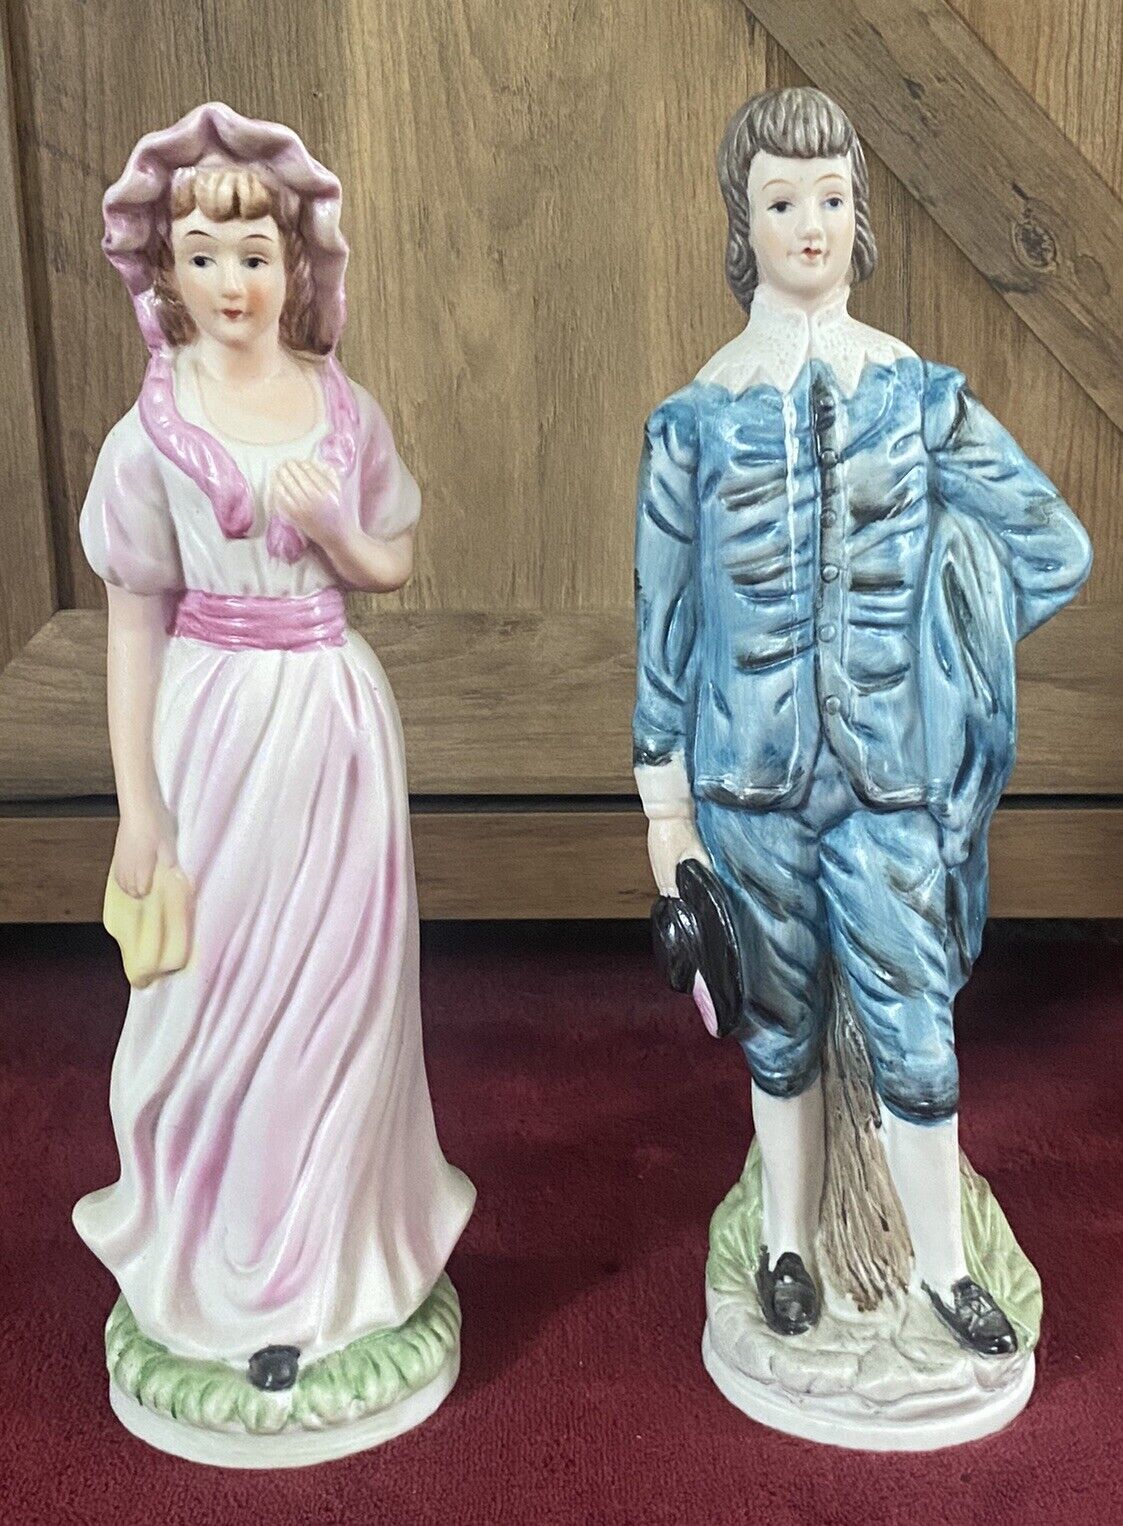 Set Of 2 Vintage hand painted bisque Pinky & Blue boy figurines 10.5”